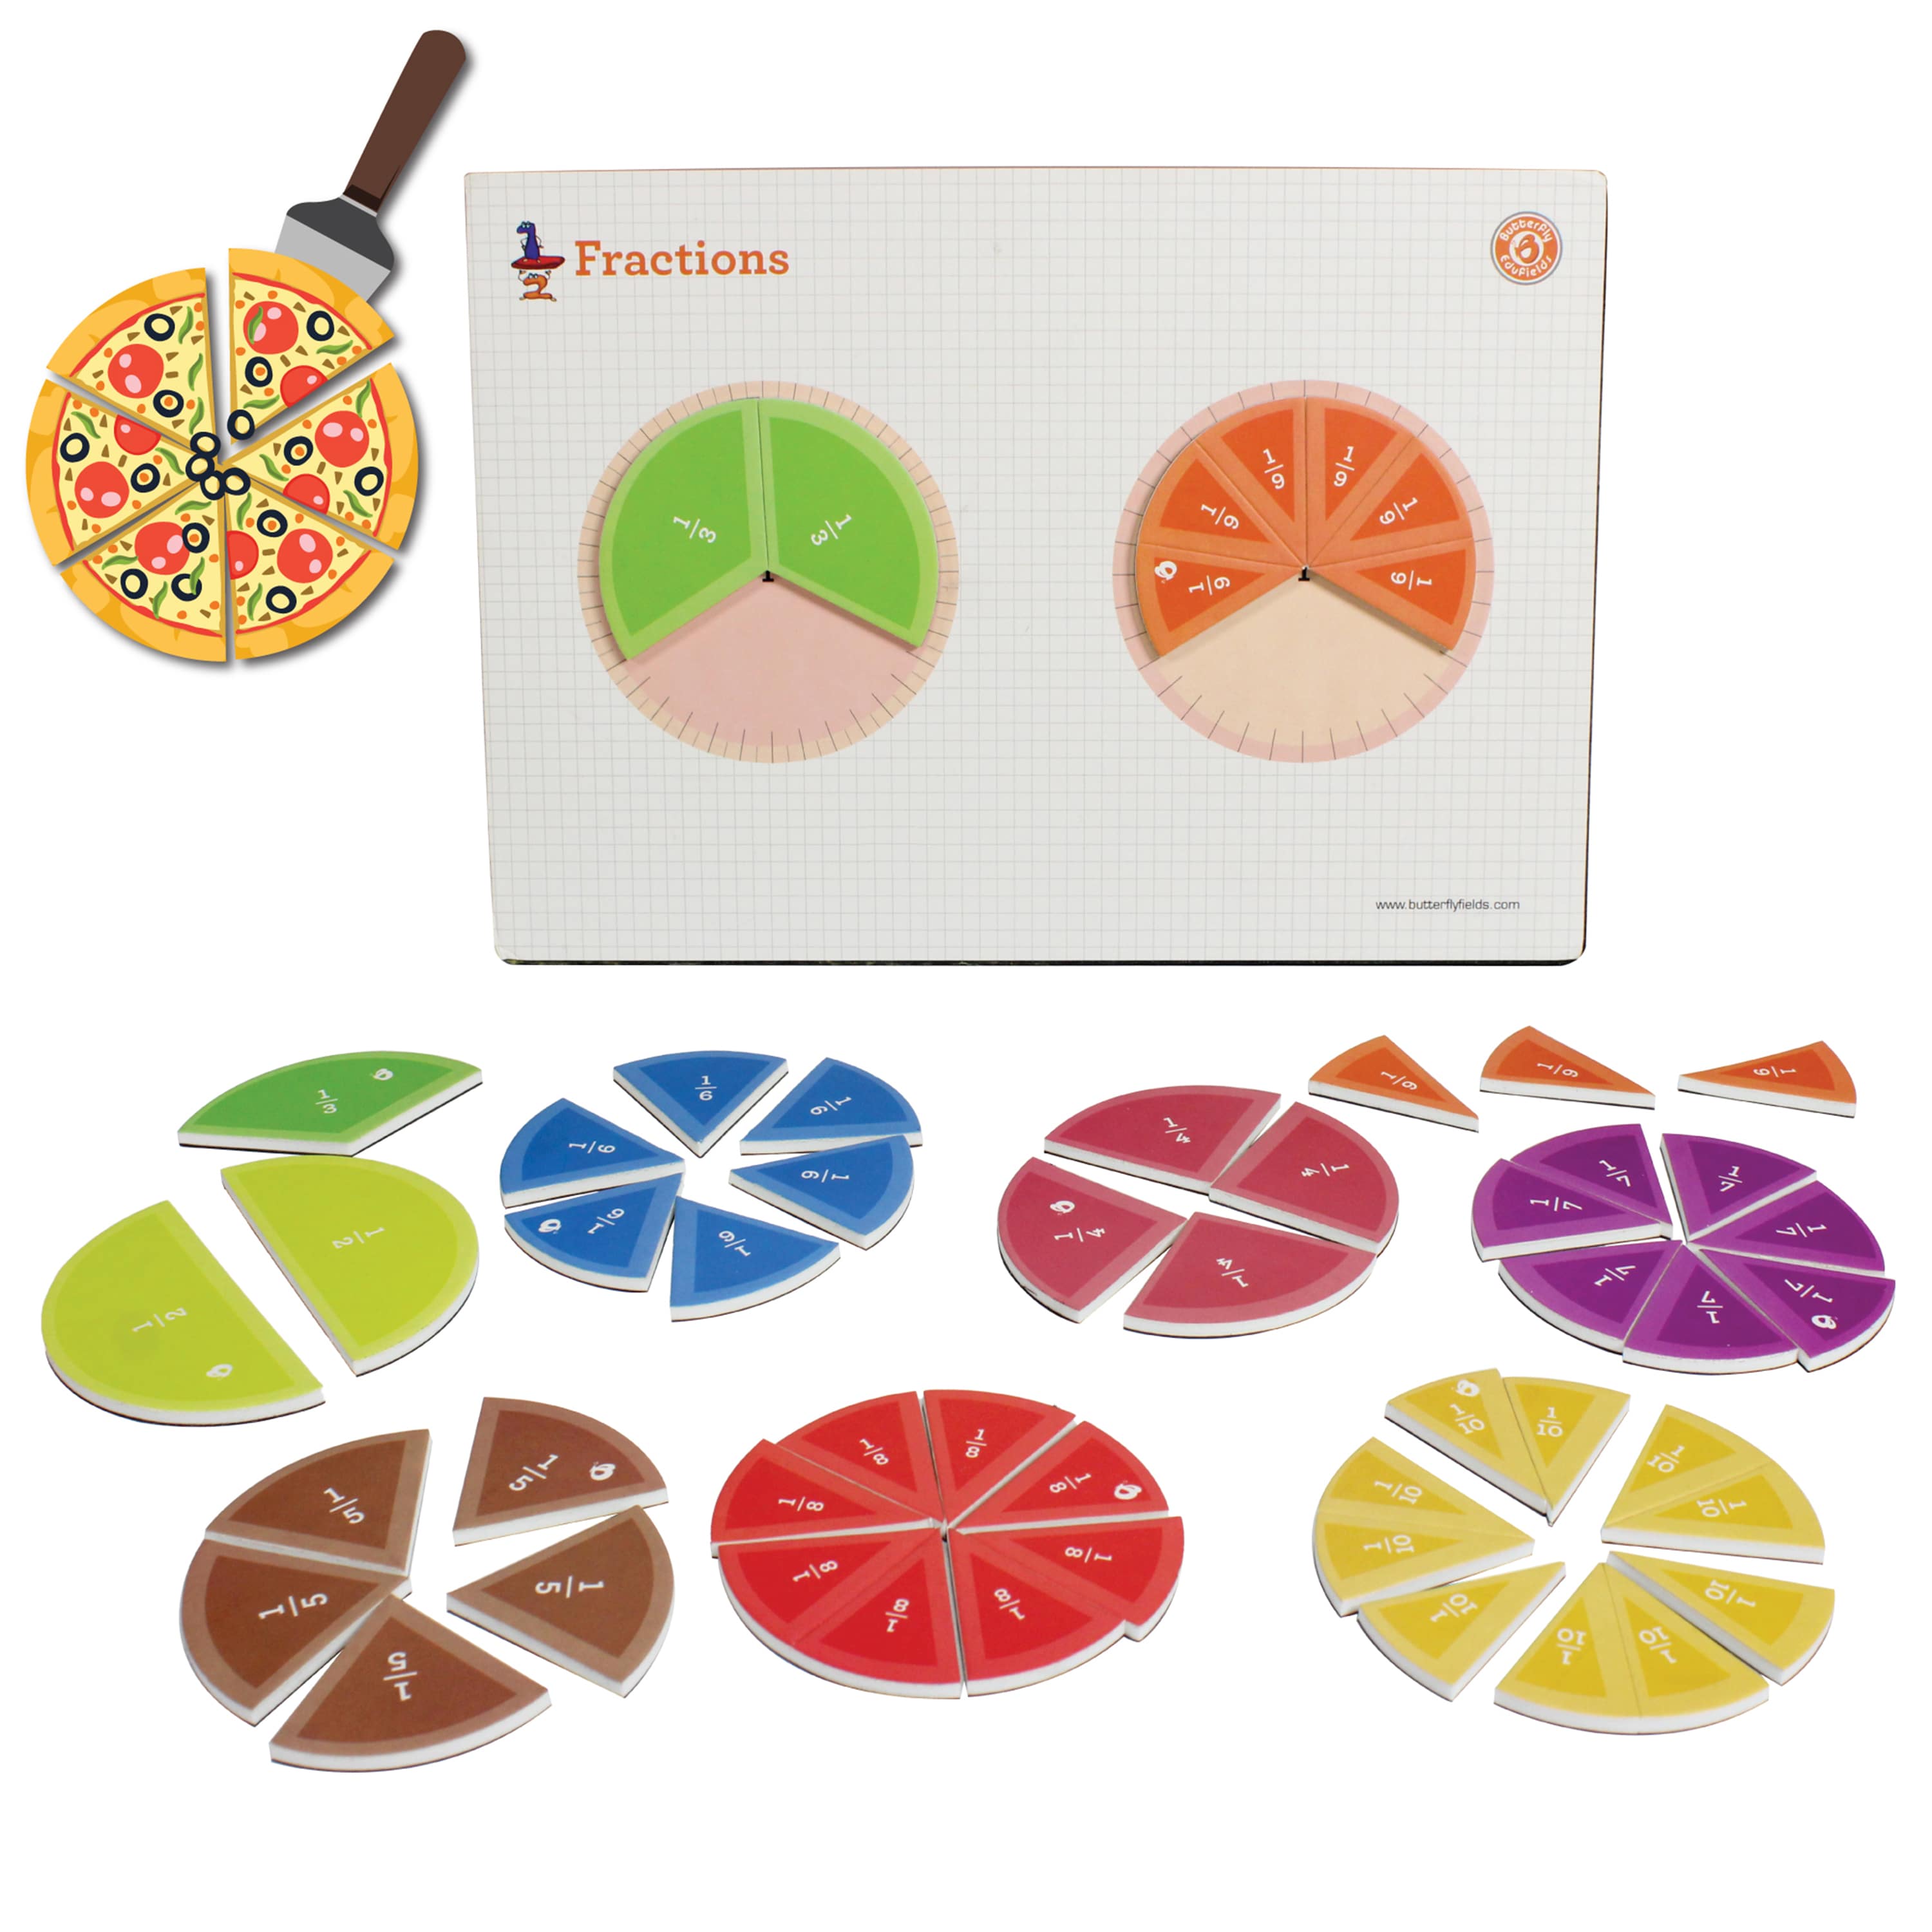 Fractions - Comparing & Adding Like Fractions Math kit diy activity projects for kids